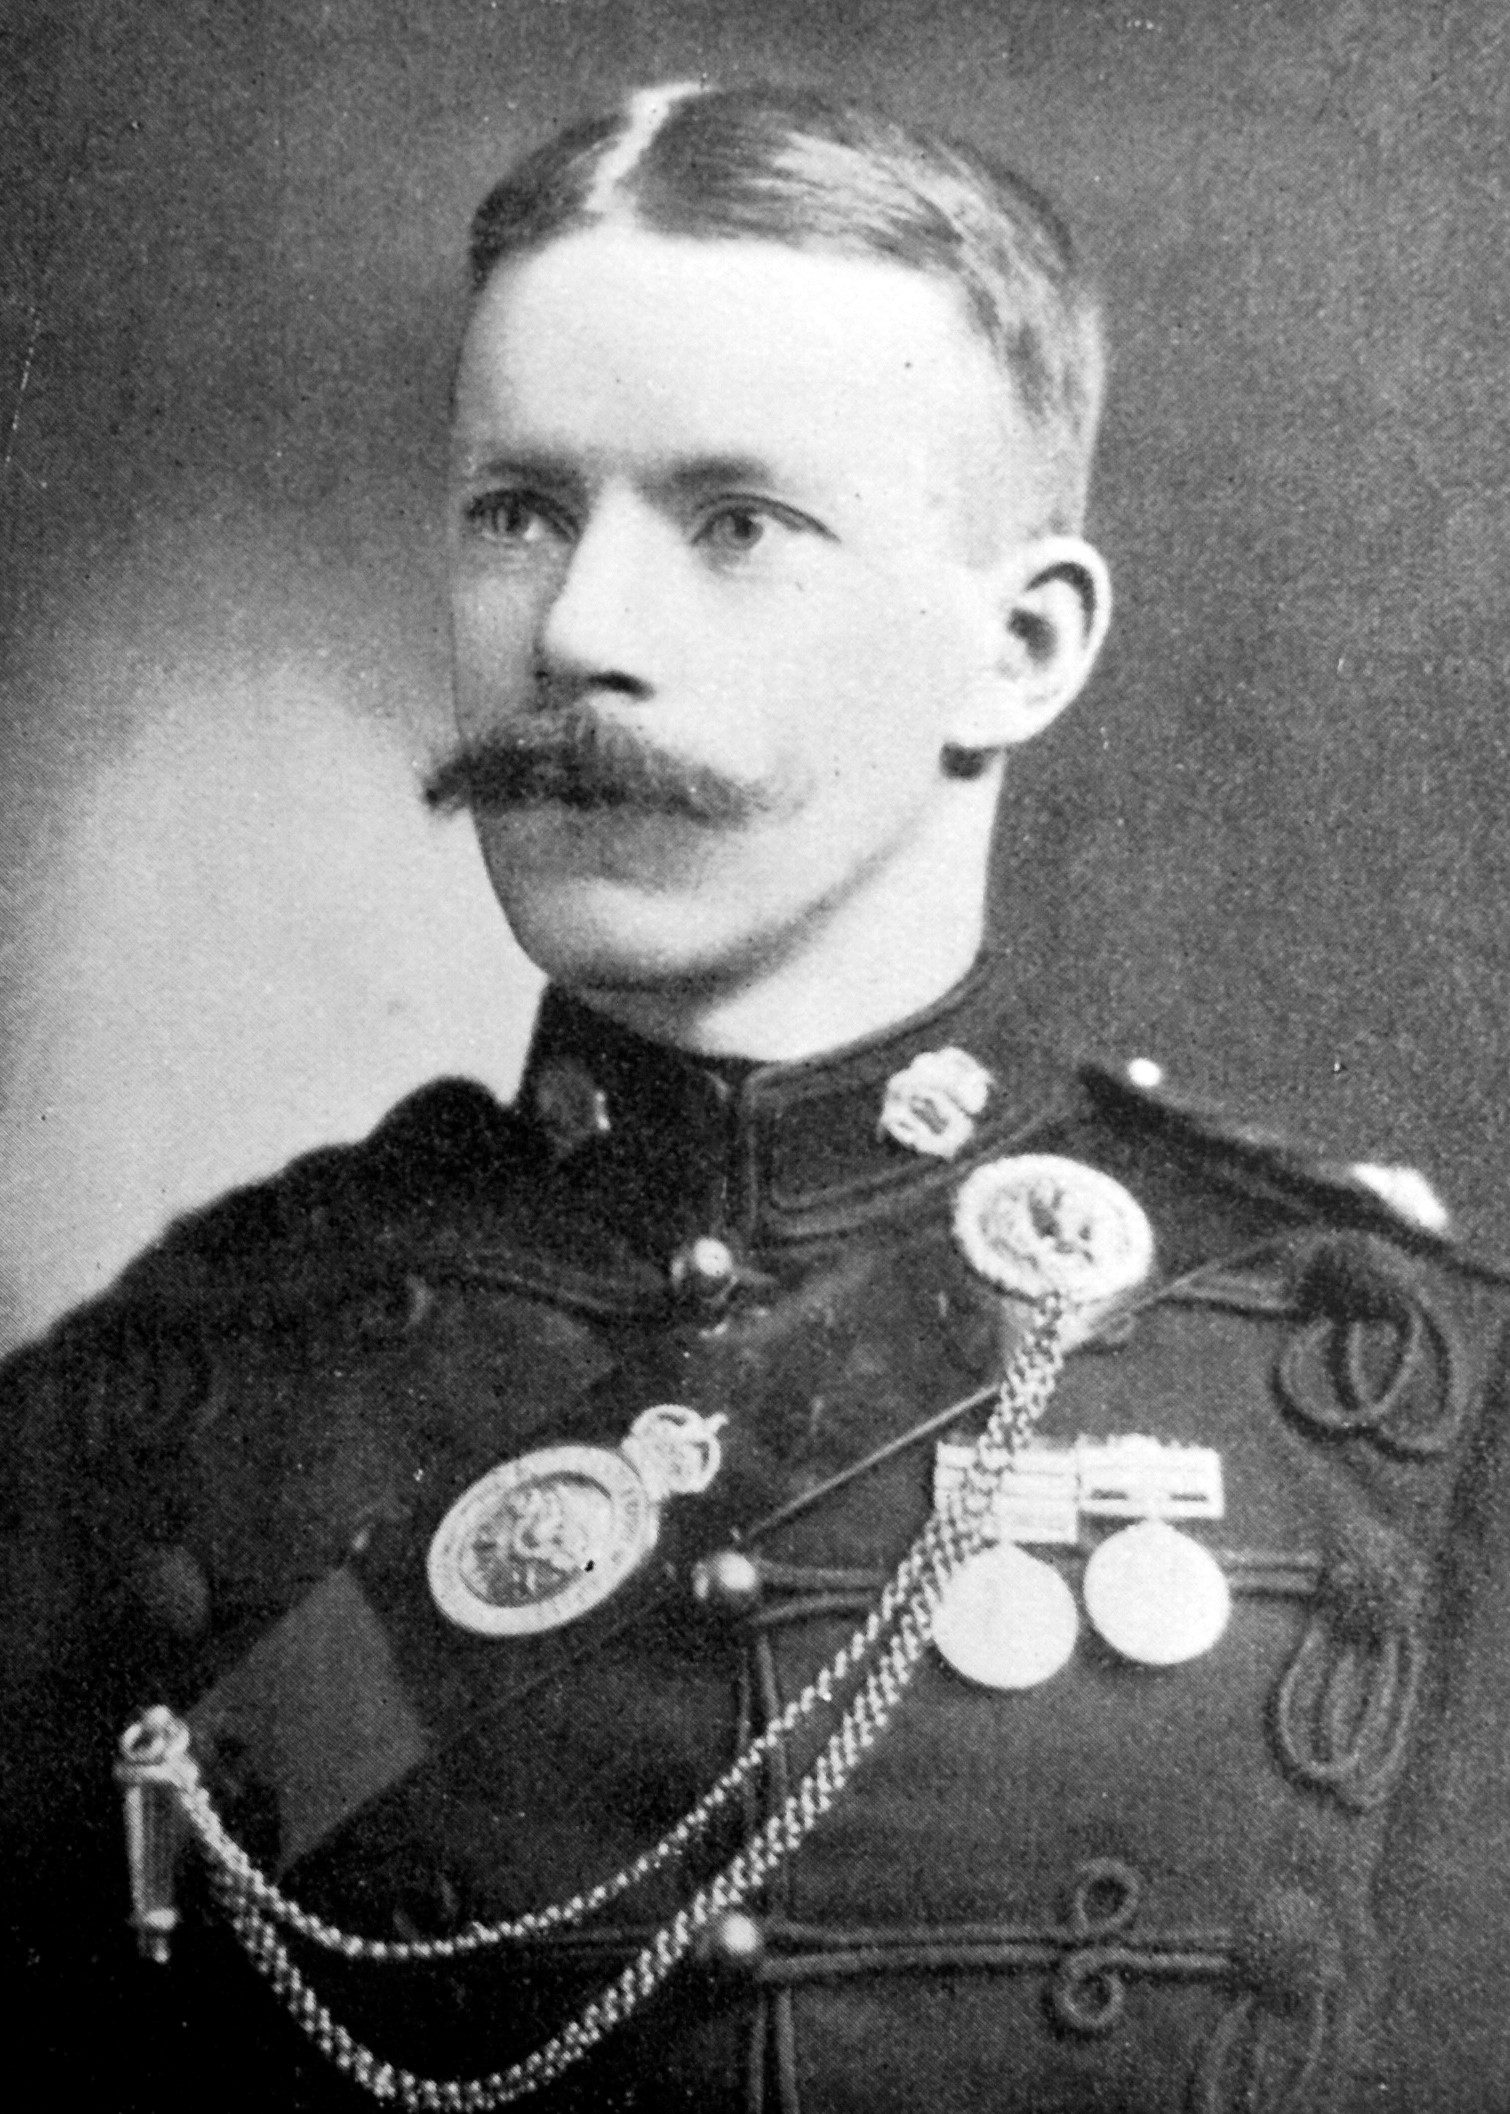 Percy Overton in the full dress uniform of an officer in the Amuri Mounted Rifles in about 1909